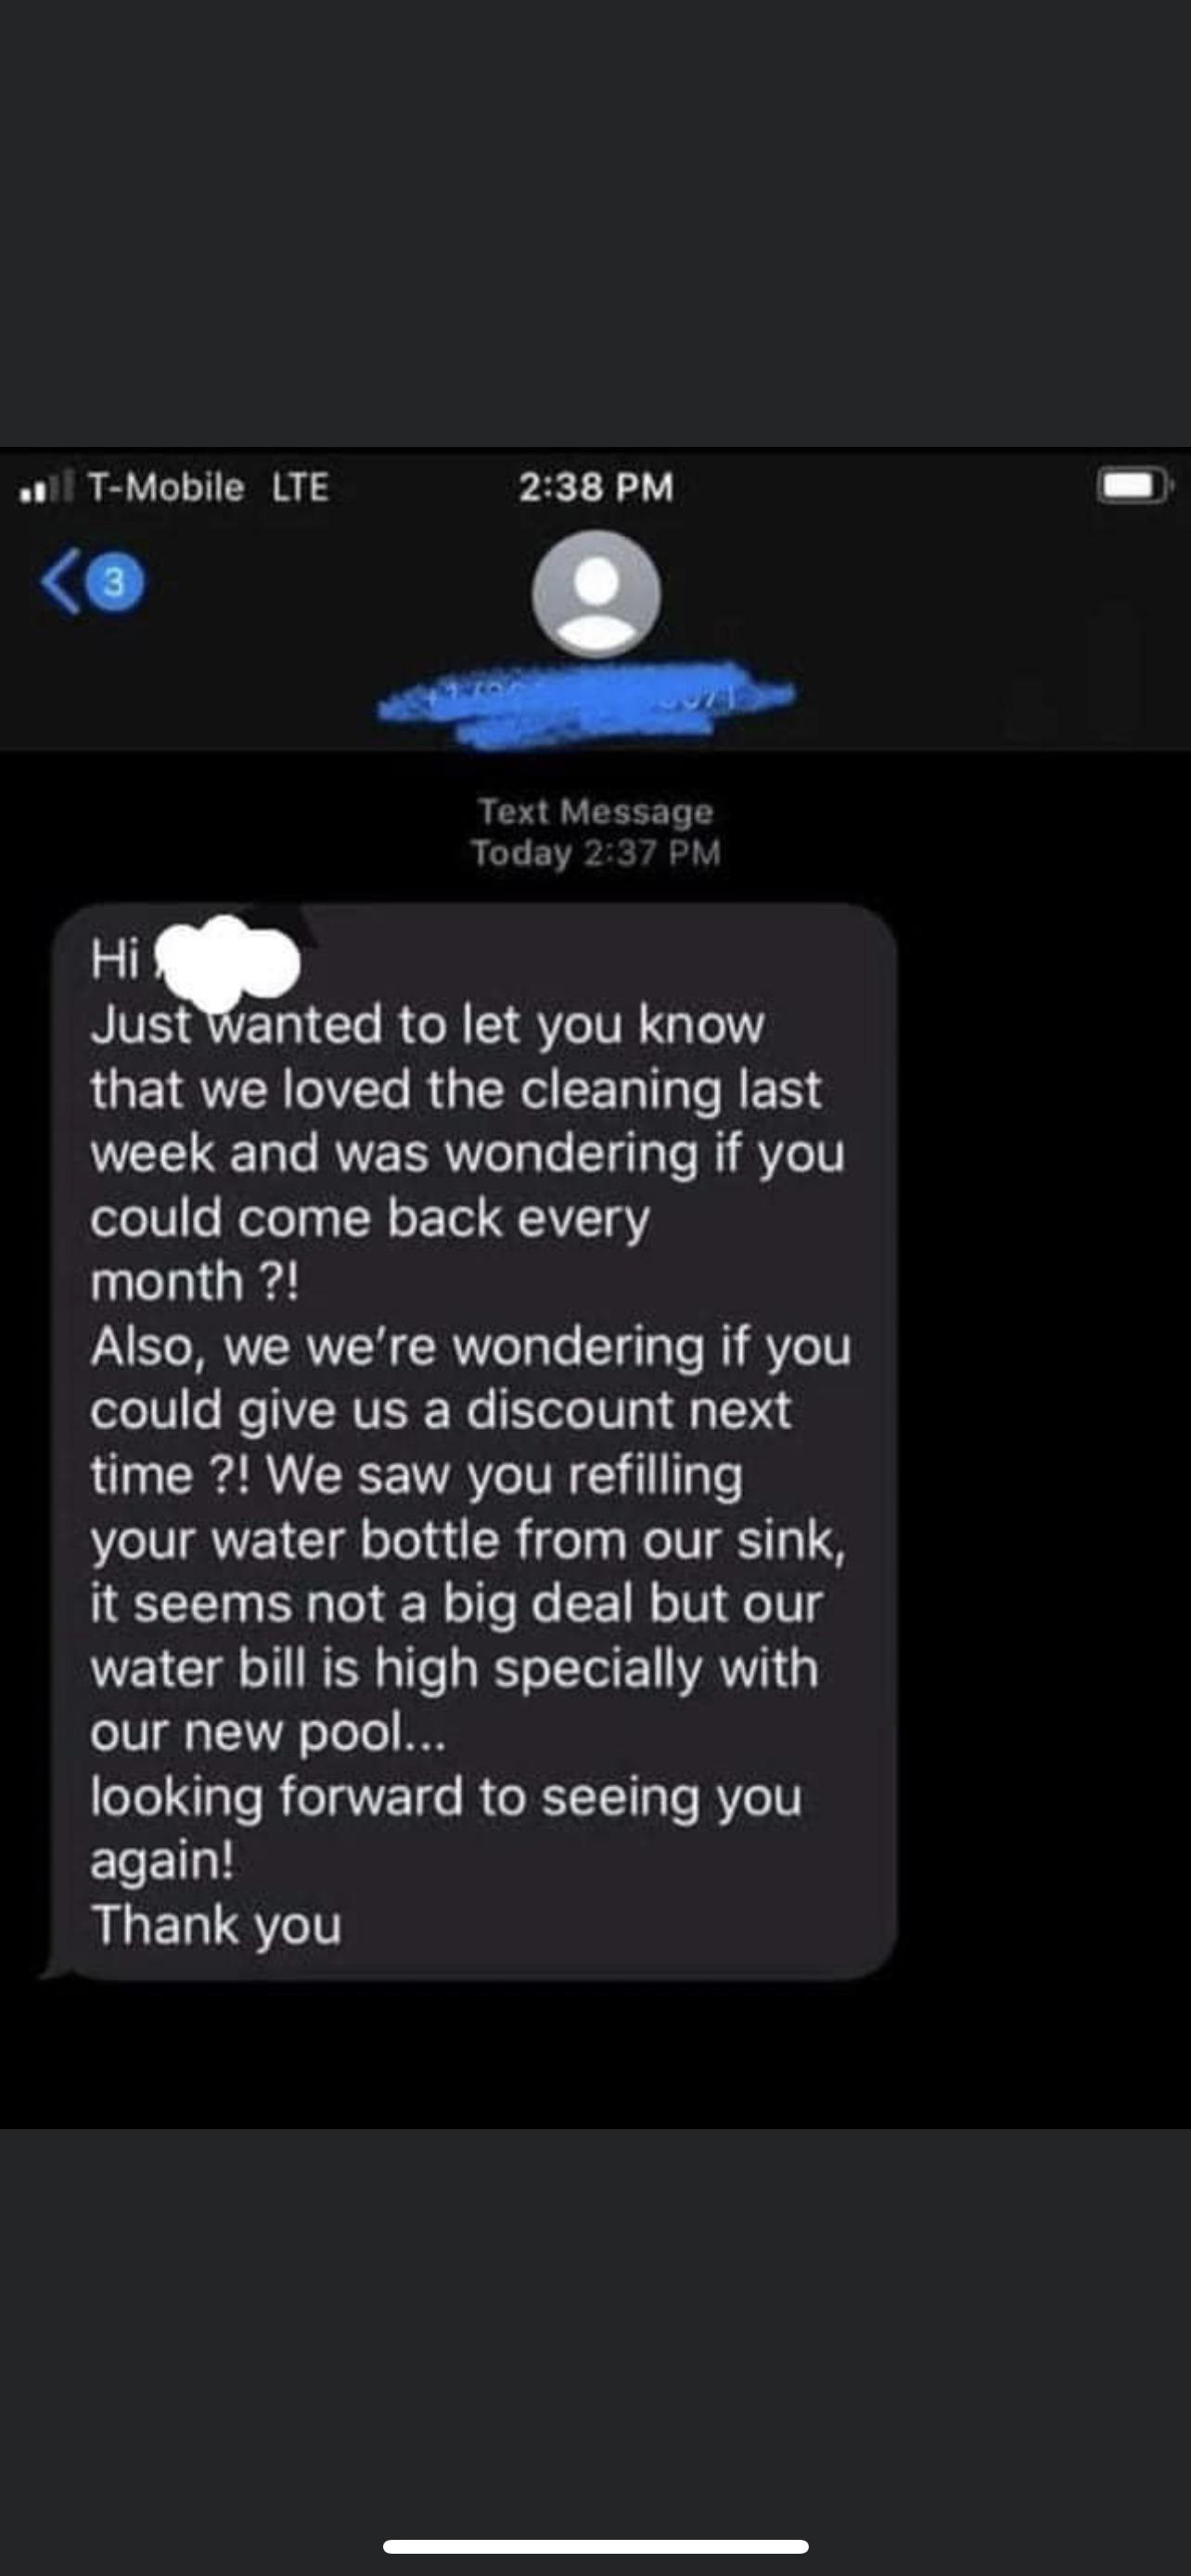 cringe pics - cringe - choosing beggars - .TMobile Lte 3 Text Message Today Hi Just wanted to let you know that we loved the cleaning last week and was wondering if you could come back every month ?! Also, we we're wondering if you could give us a discoun